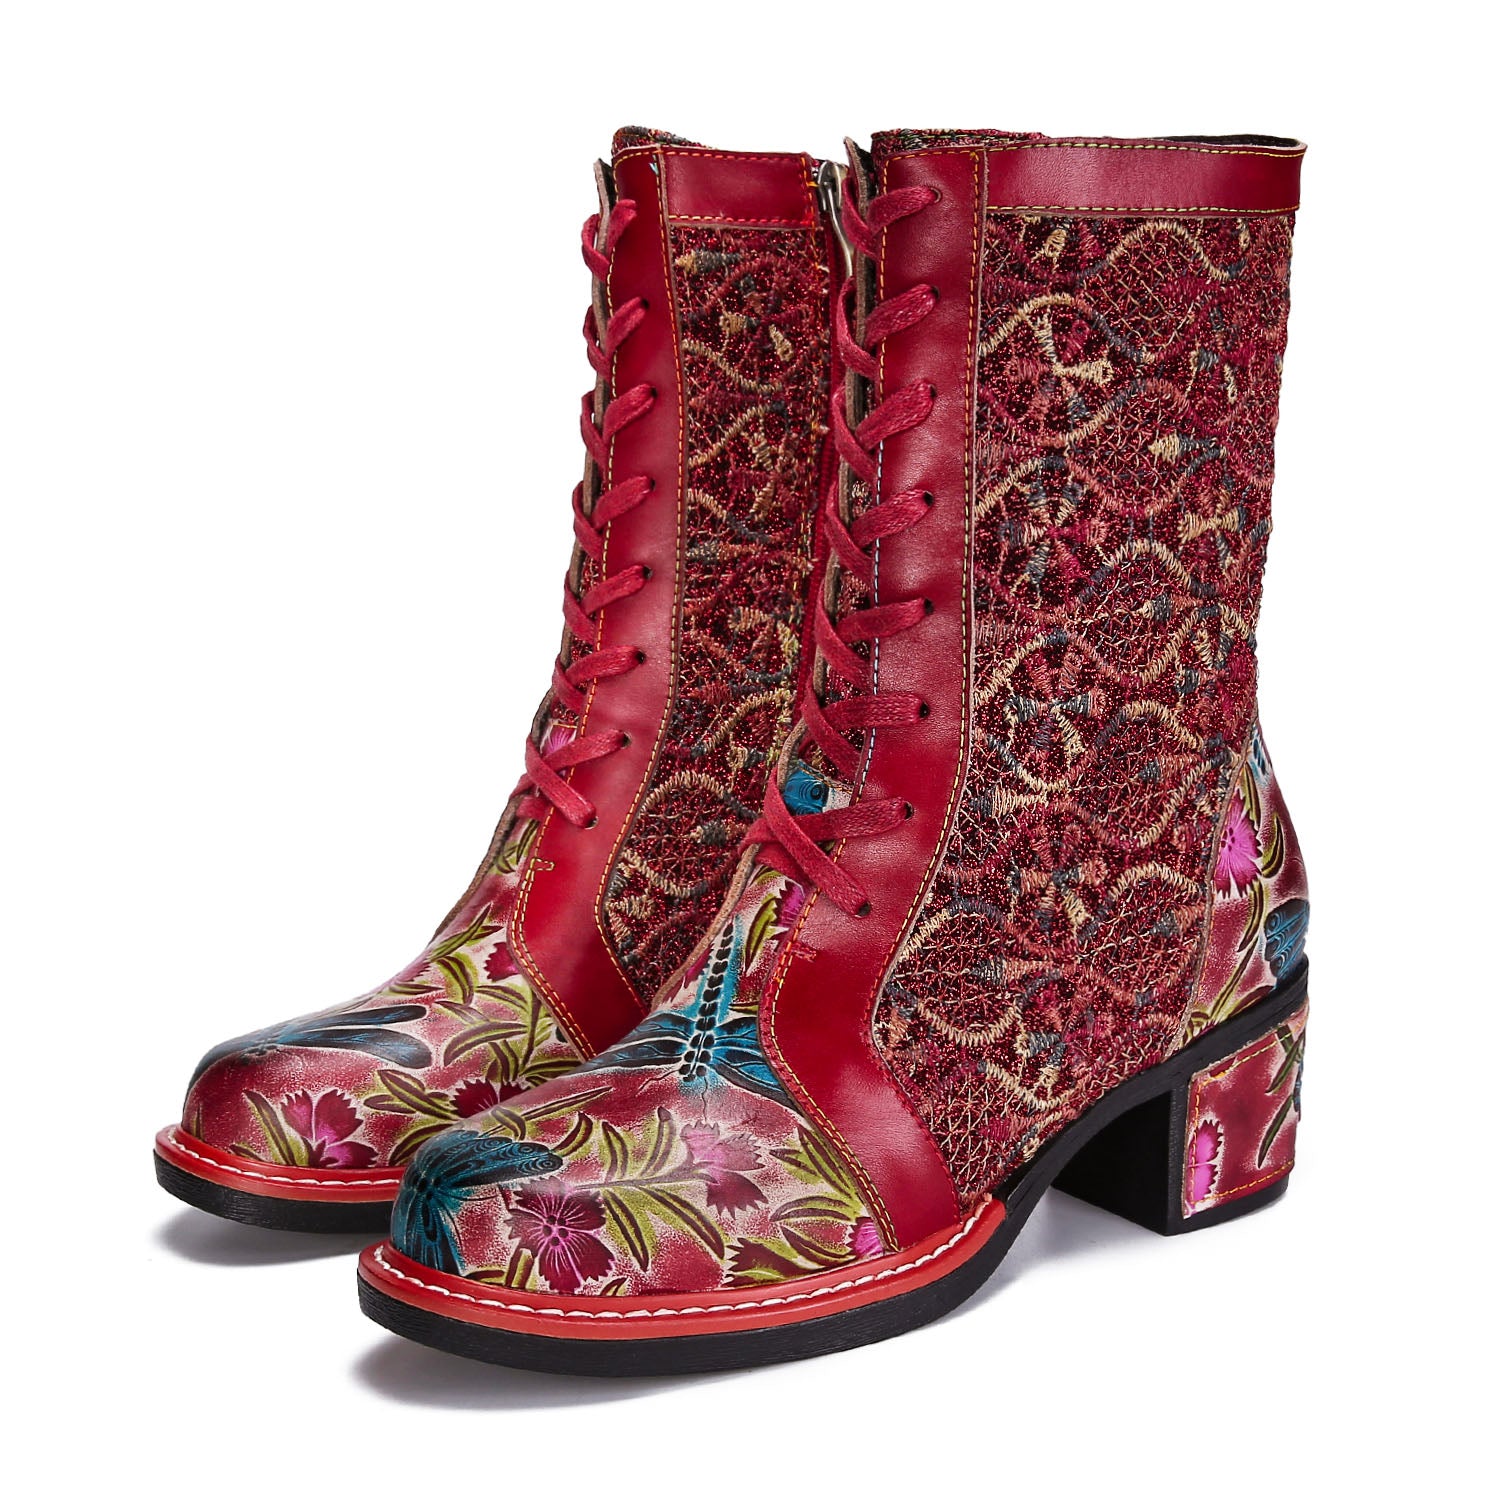 Women'sHandmade Leather Embroidered Comfy Boots